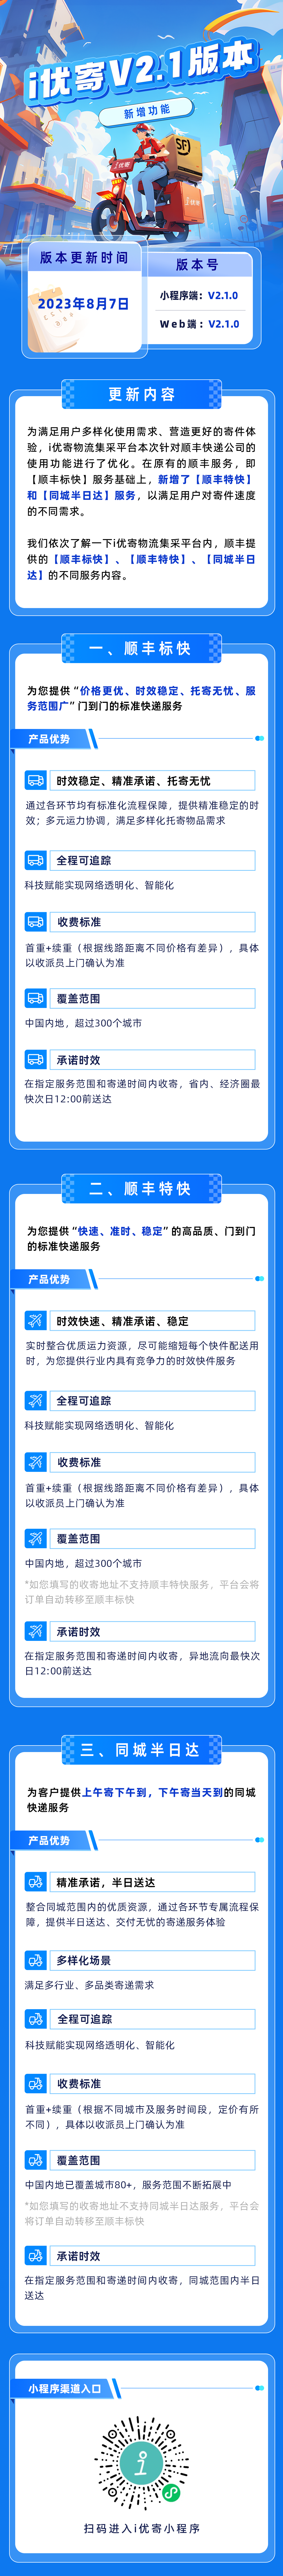 https://client-download-pre.obs.cn-north-4.myhuaweicloud.com/official/pro/852003680138956800.png